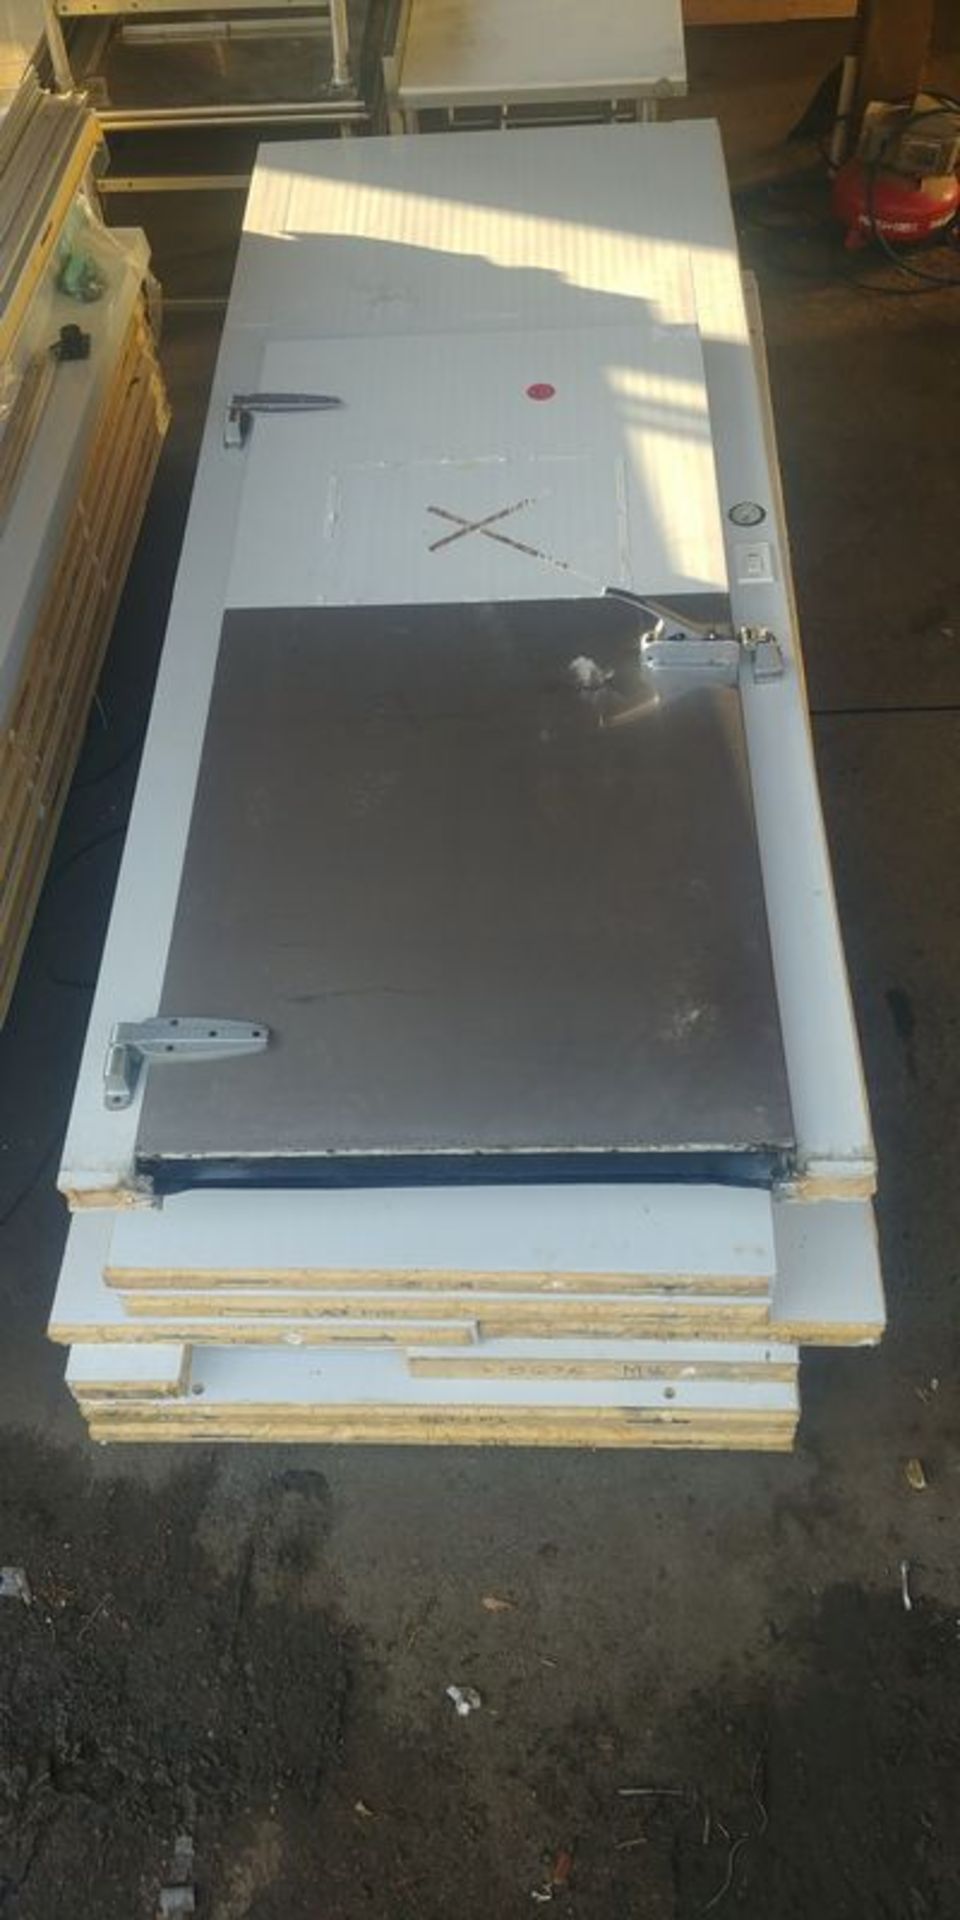 78 x 82" Walk in Cooler Box with lights - No Refrigeration - Image 2 of 2